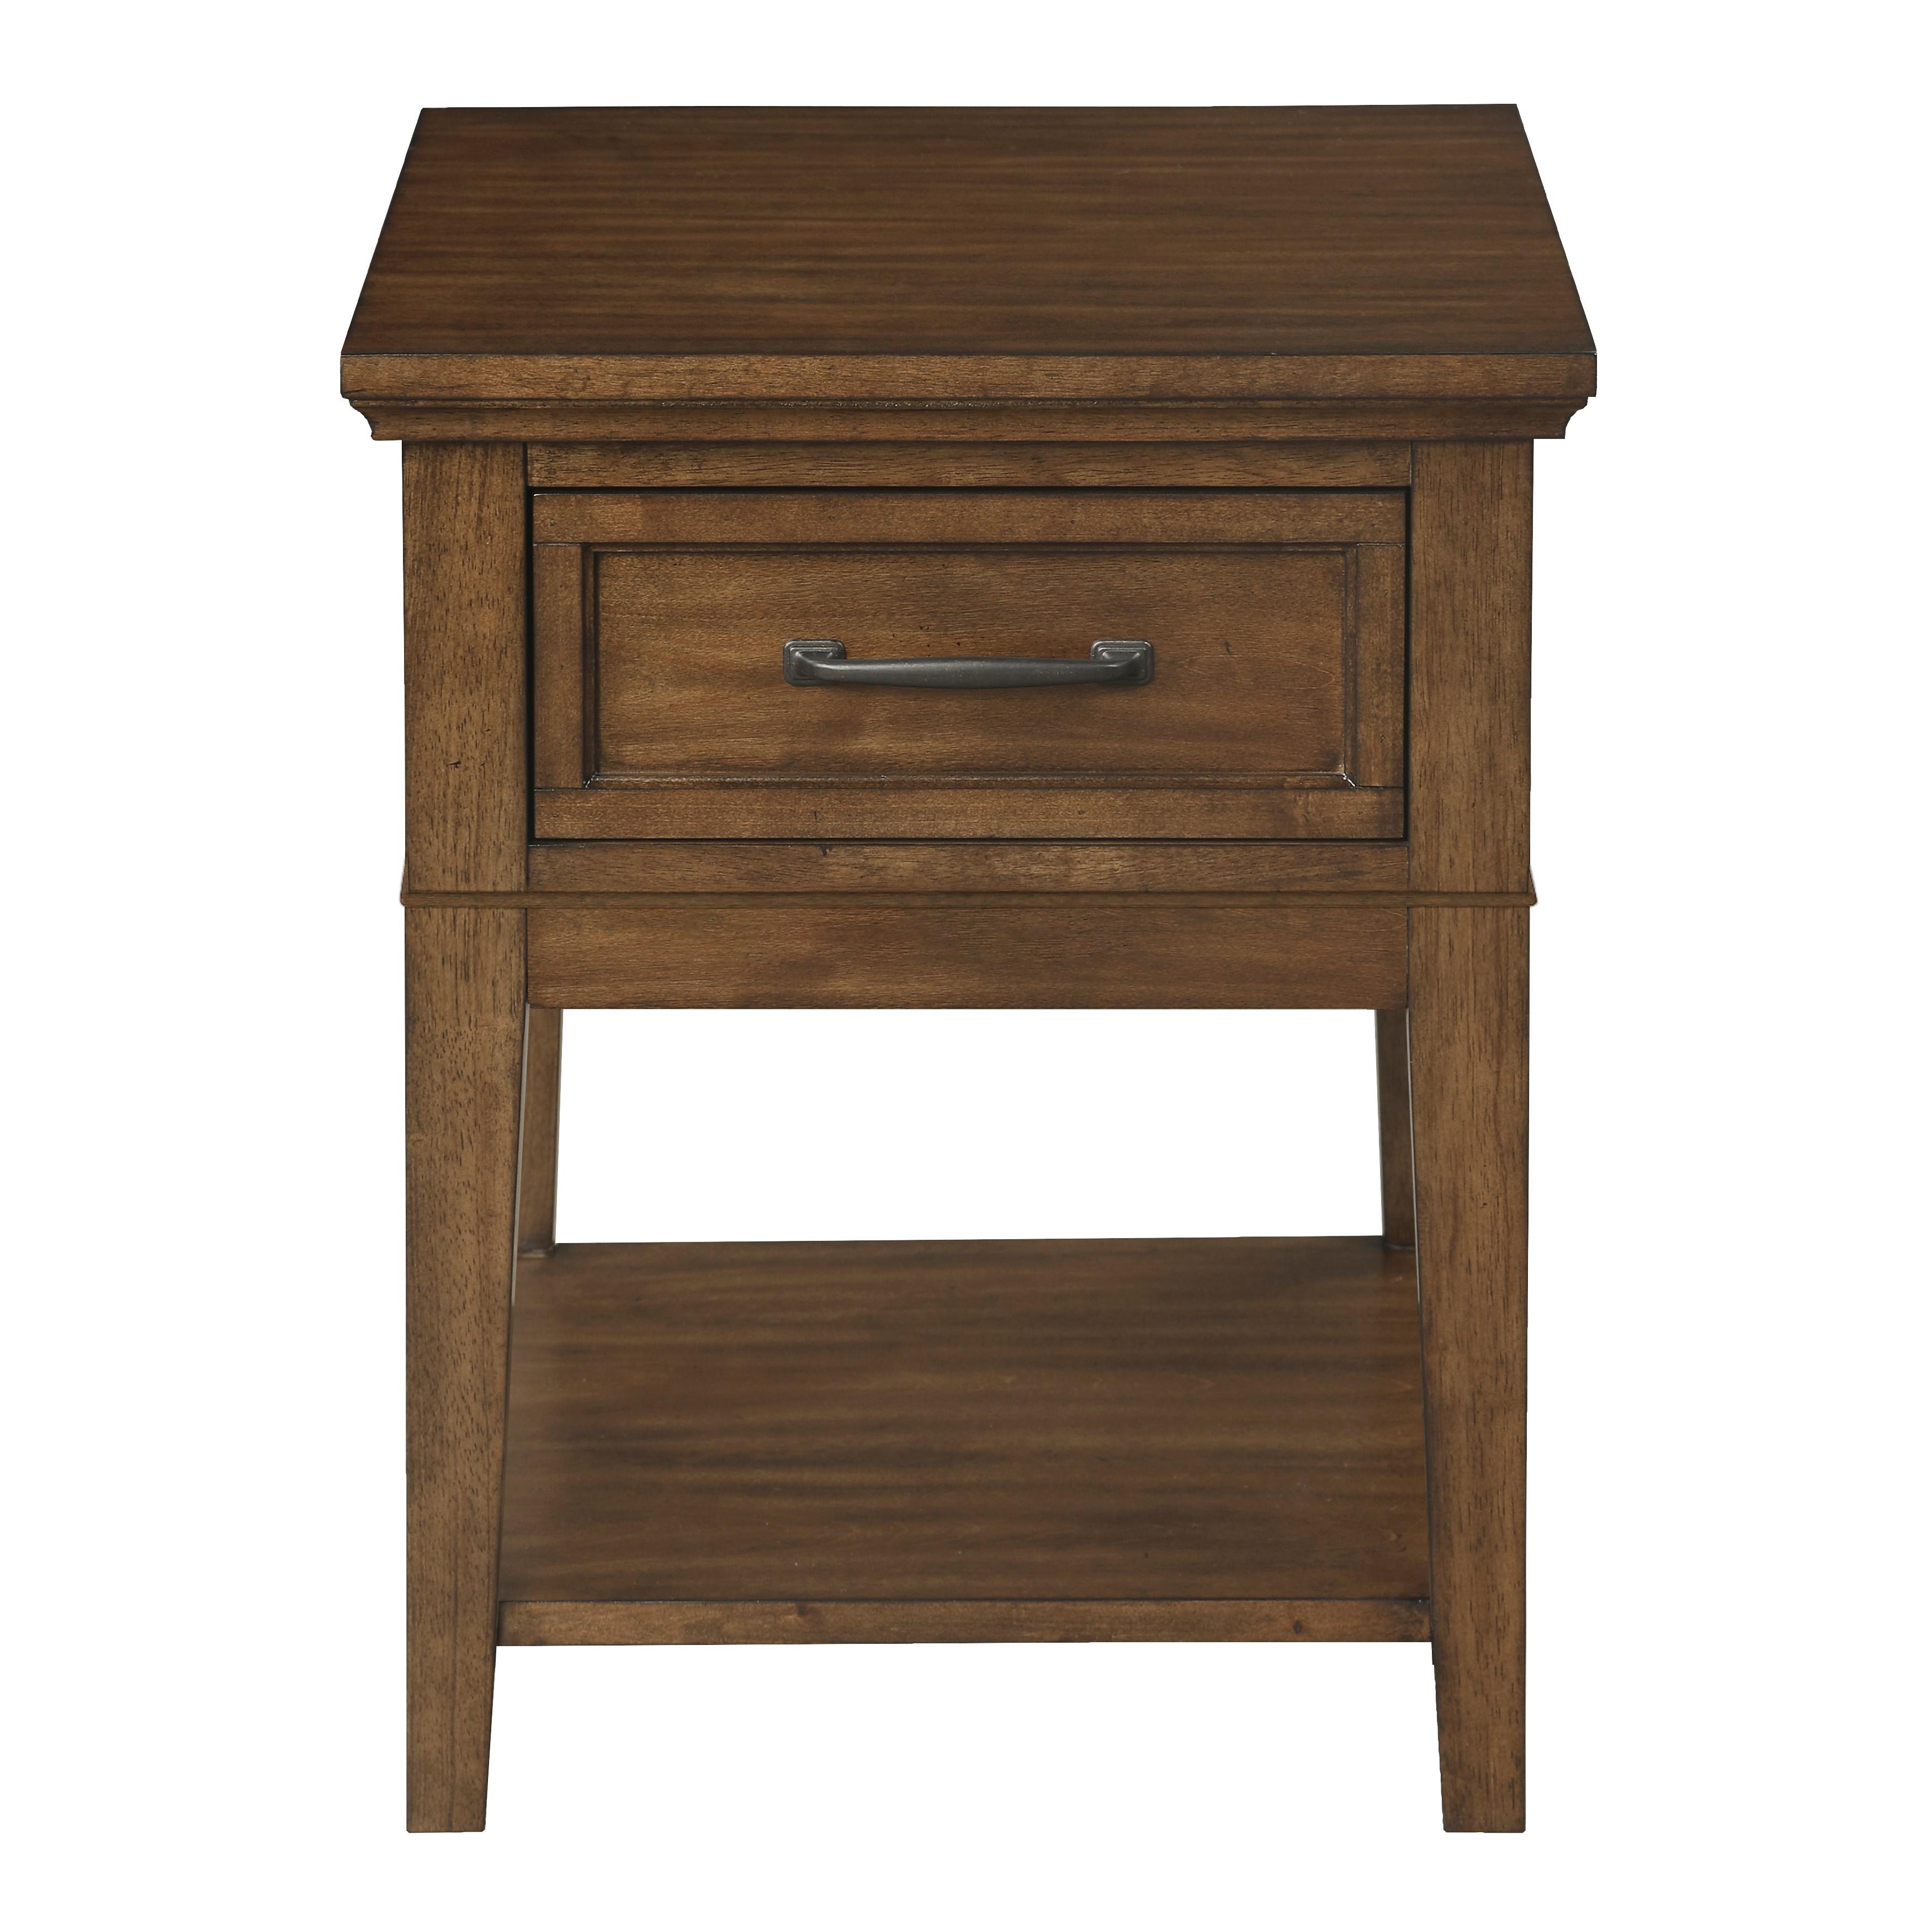 Transitional End Table 3620-04 Whitley 3620-04 in Walnut 